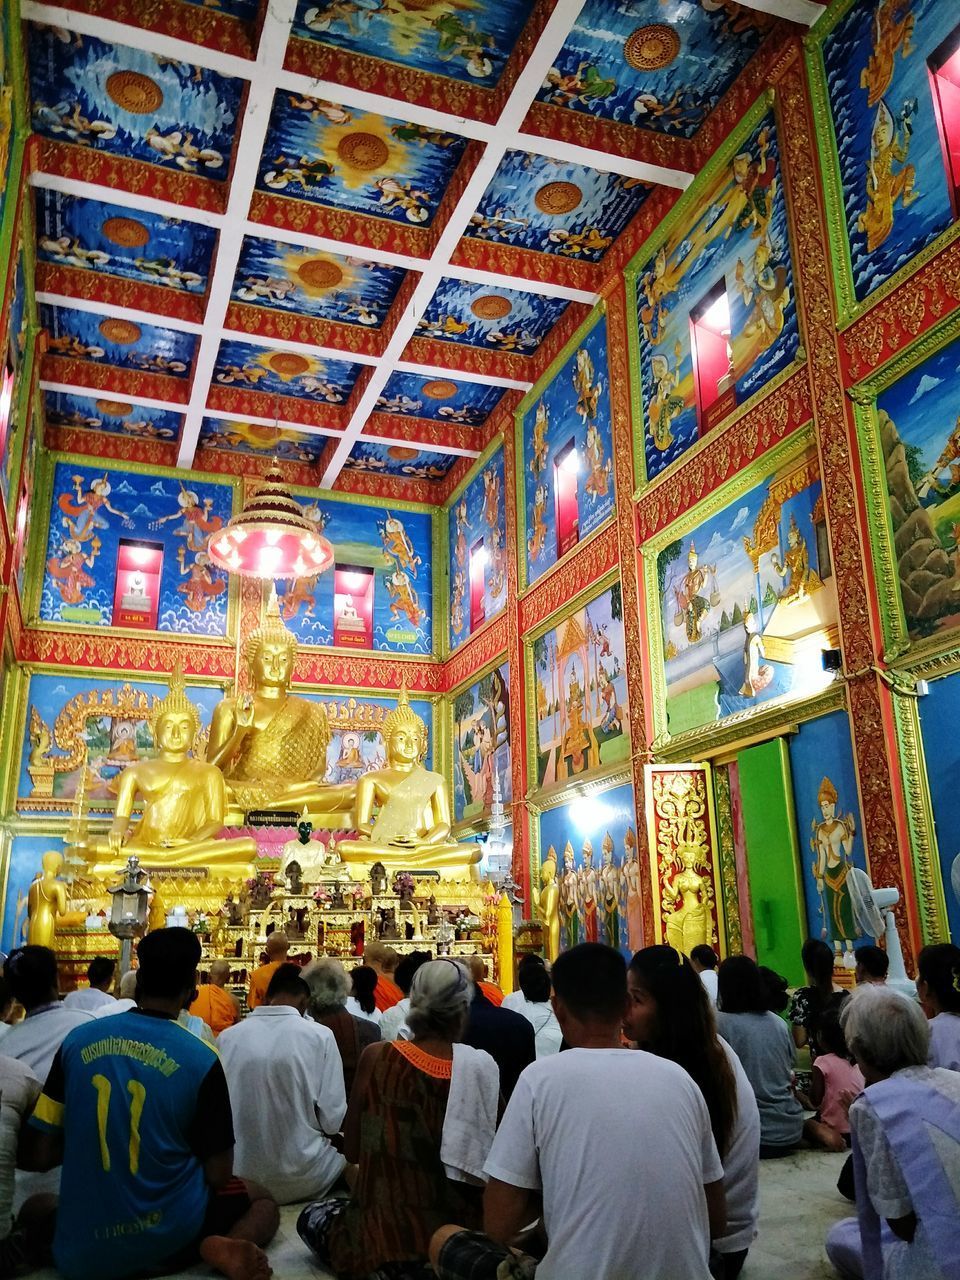 REAR VIEW OF PEOPLE IN ILLUMINATED TEMPLE